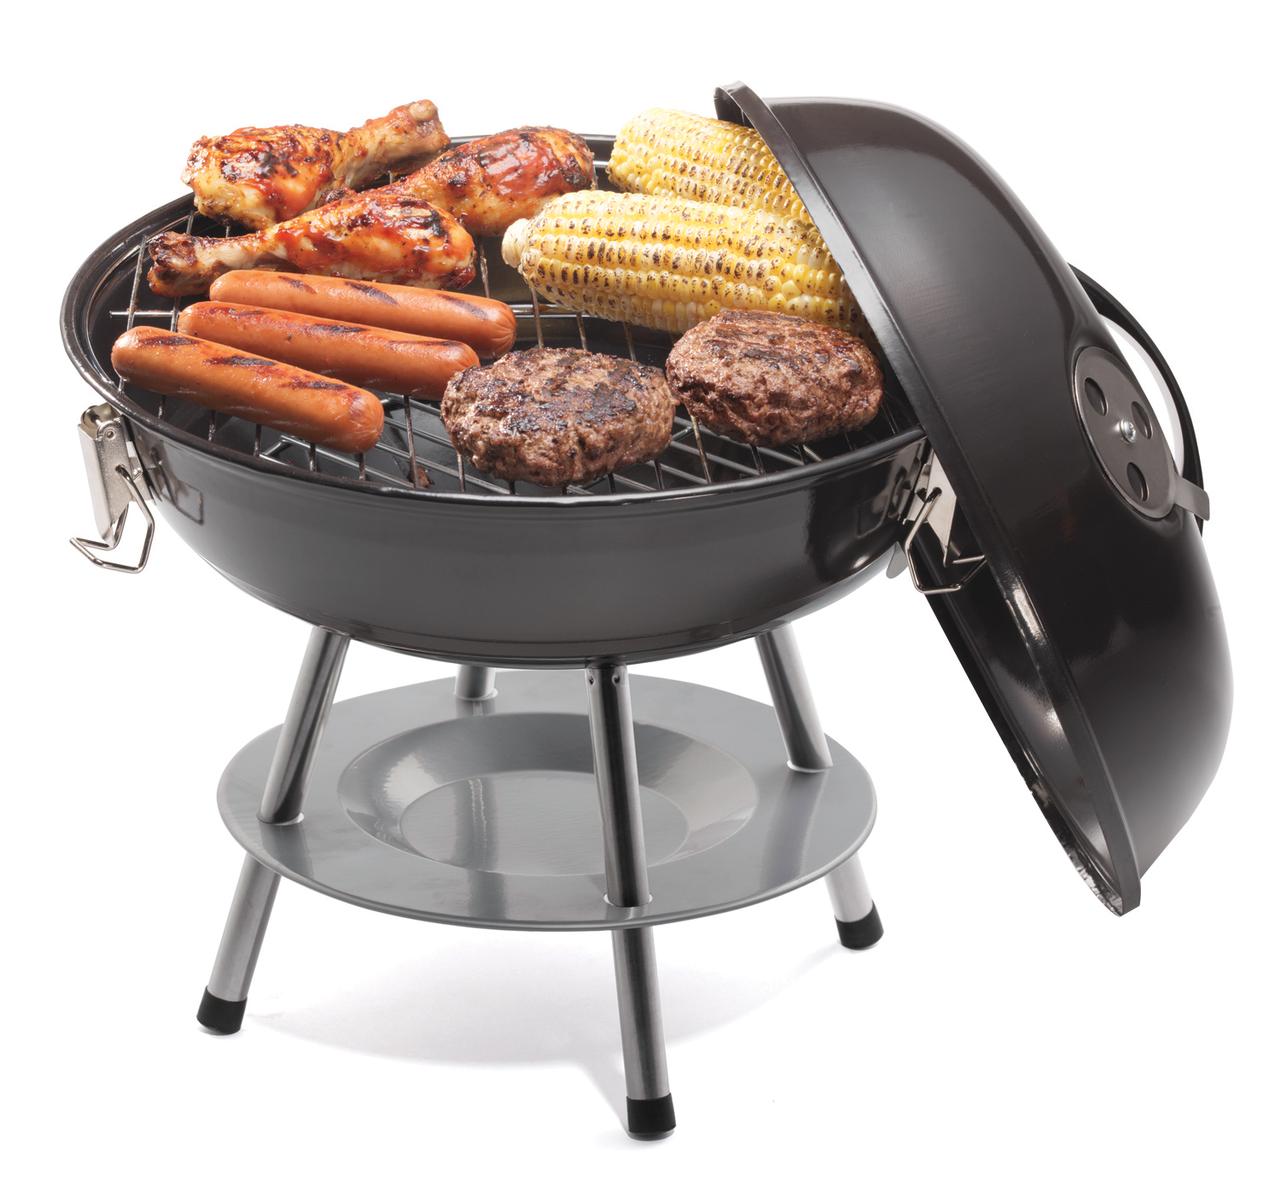 Cuisinart Portable Charcoal Grill - image 3 of 7